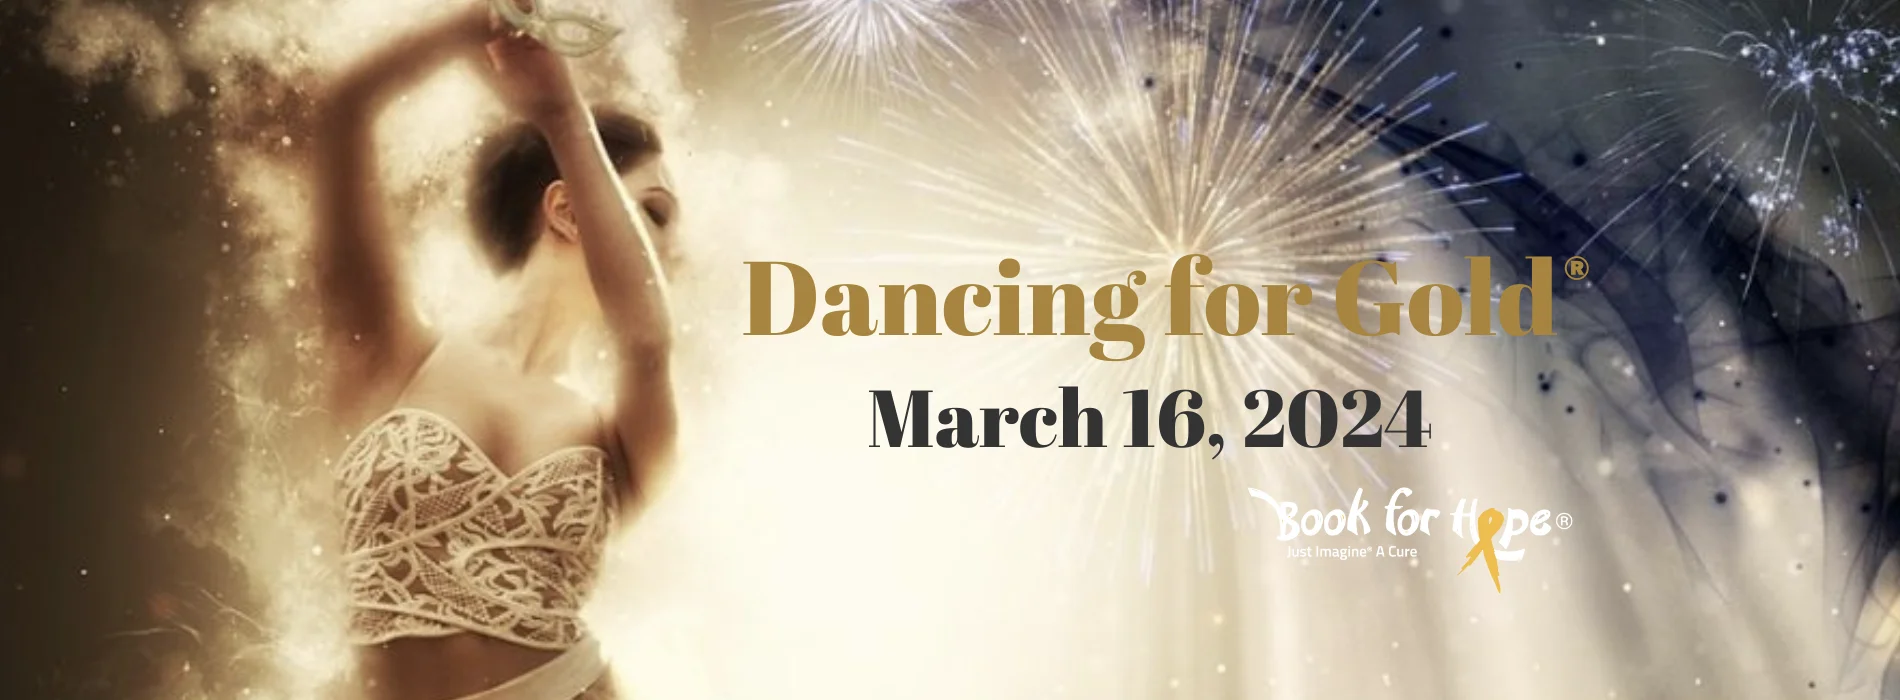 4th Annual Dancing for Gold®